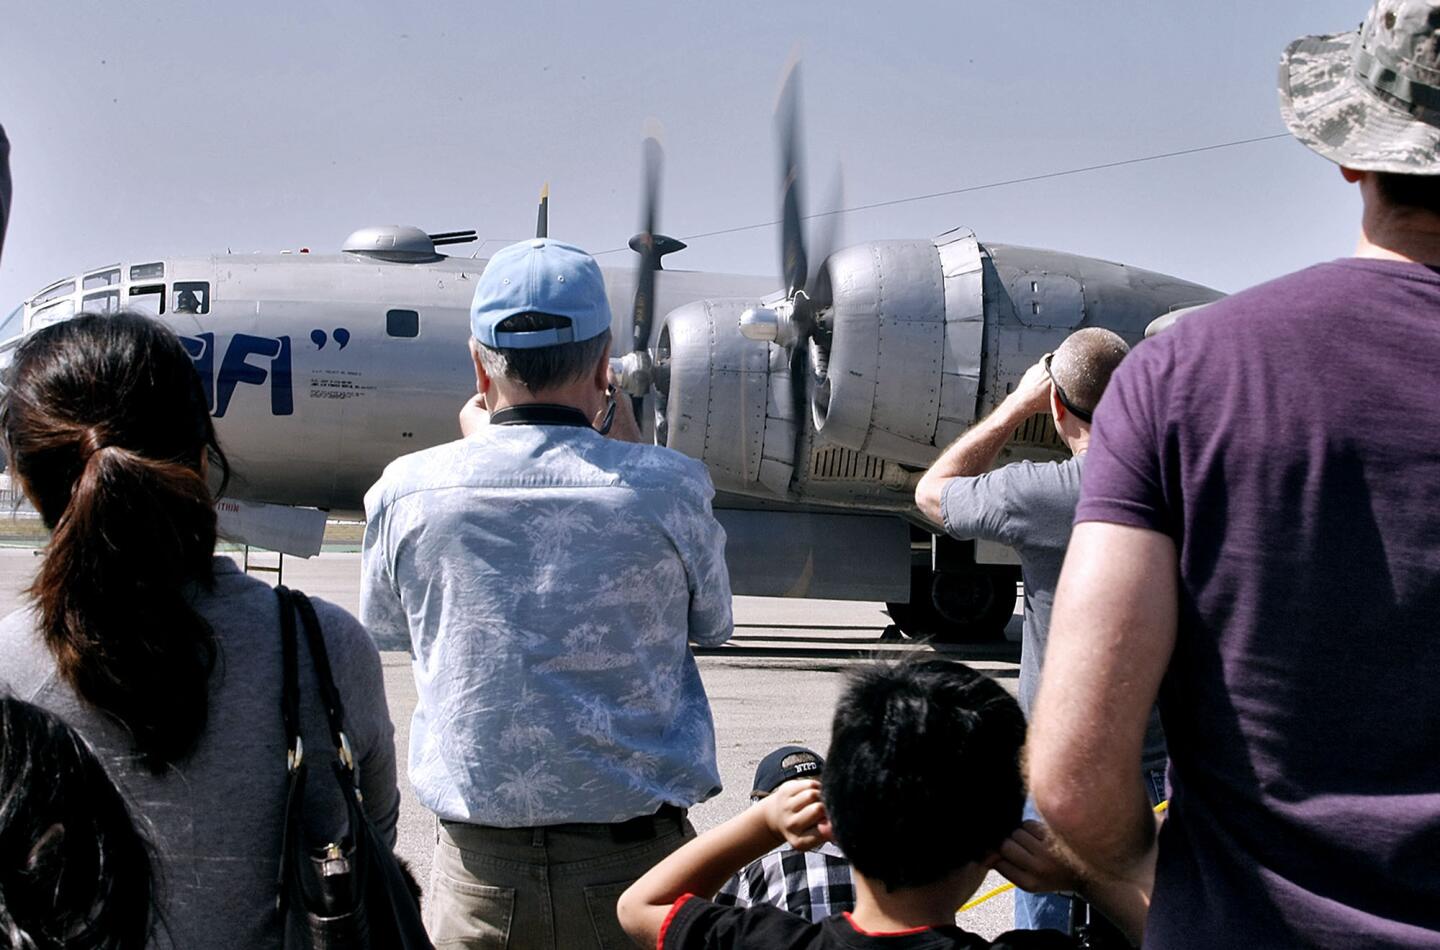 Aviation enthusiasts watch a B-29 Superfortress named "Fifi" as it turns its engines while parked at the Burbank Airport on Saturday, March 23, 2013. After two engine tests, it was determined that a mechanical malfunction would keep the World War II-era bomber grounded for the day.